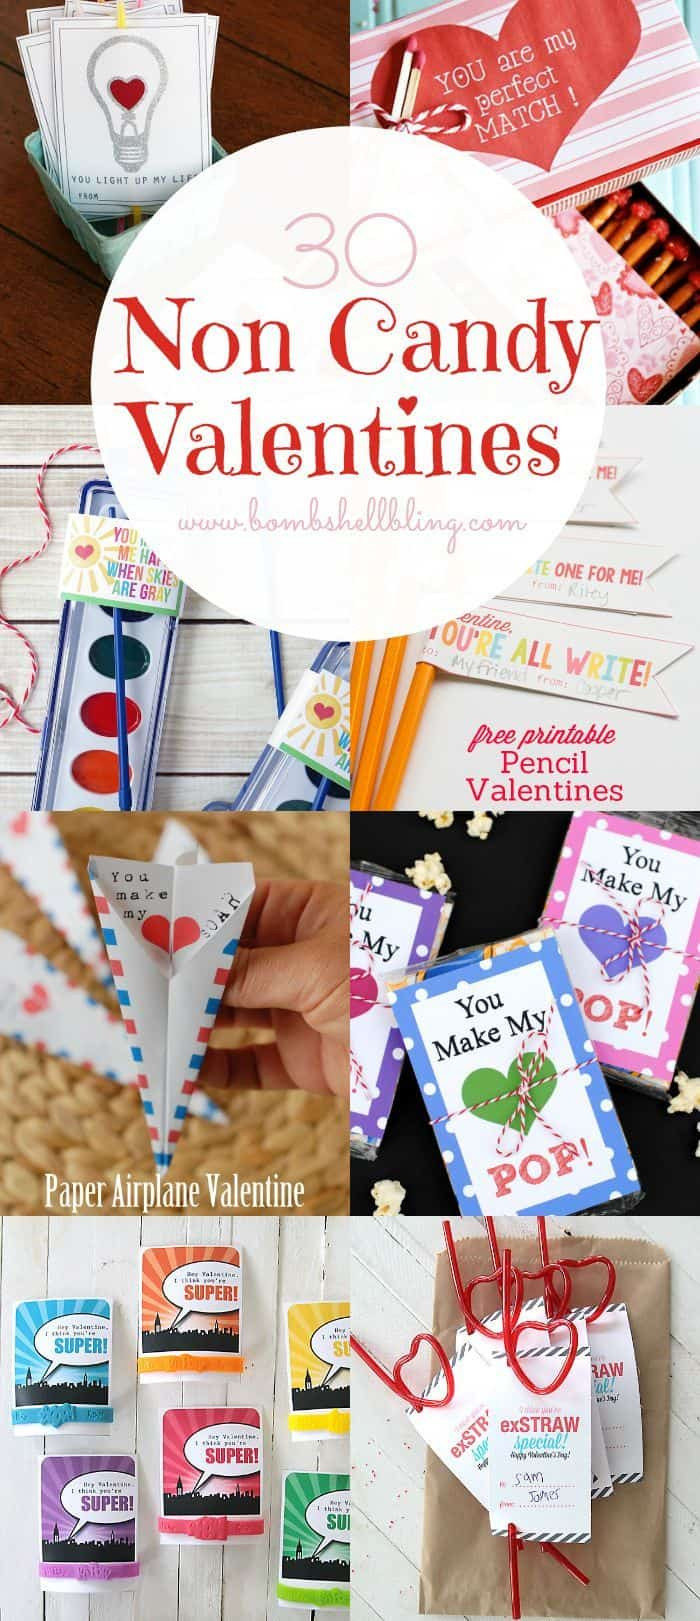 Toddler Valentine Gift Ideas
 Non Candy Valentine s Day Gift Ideas for Kids